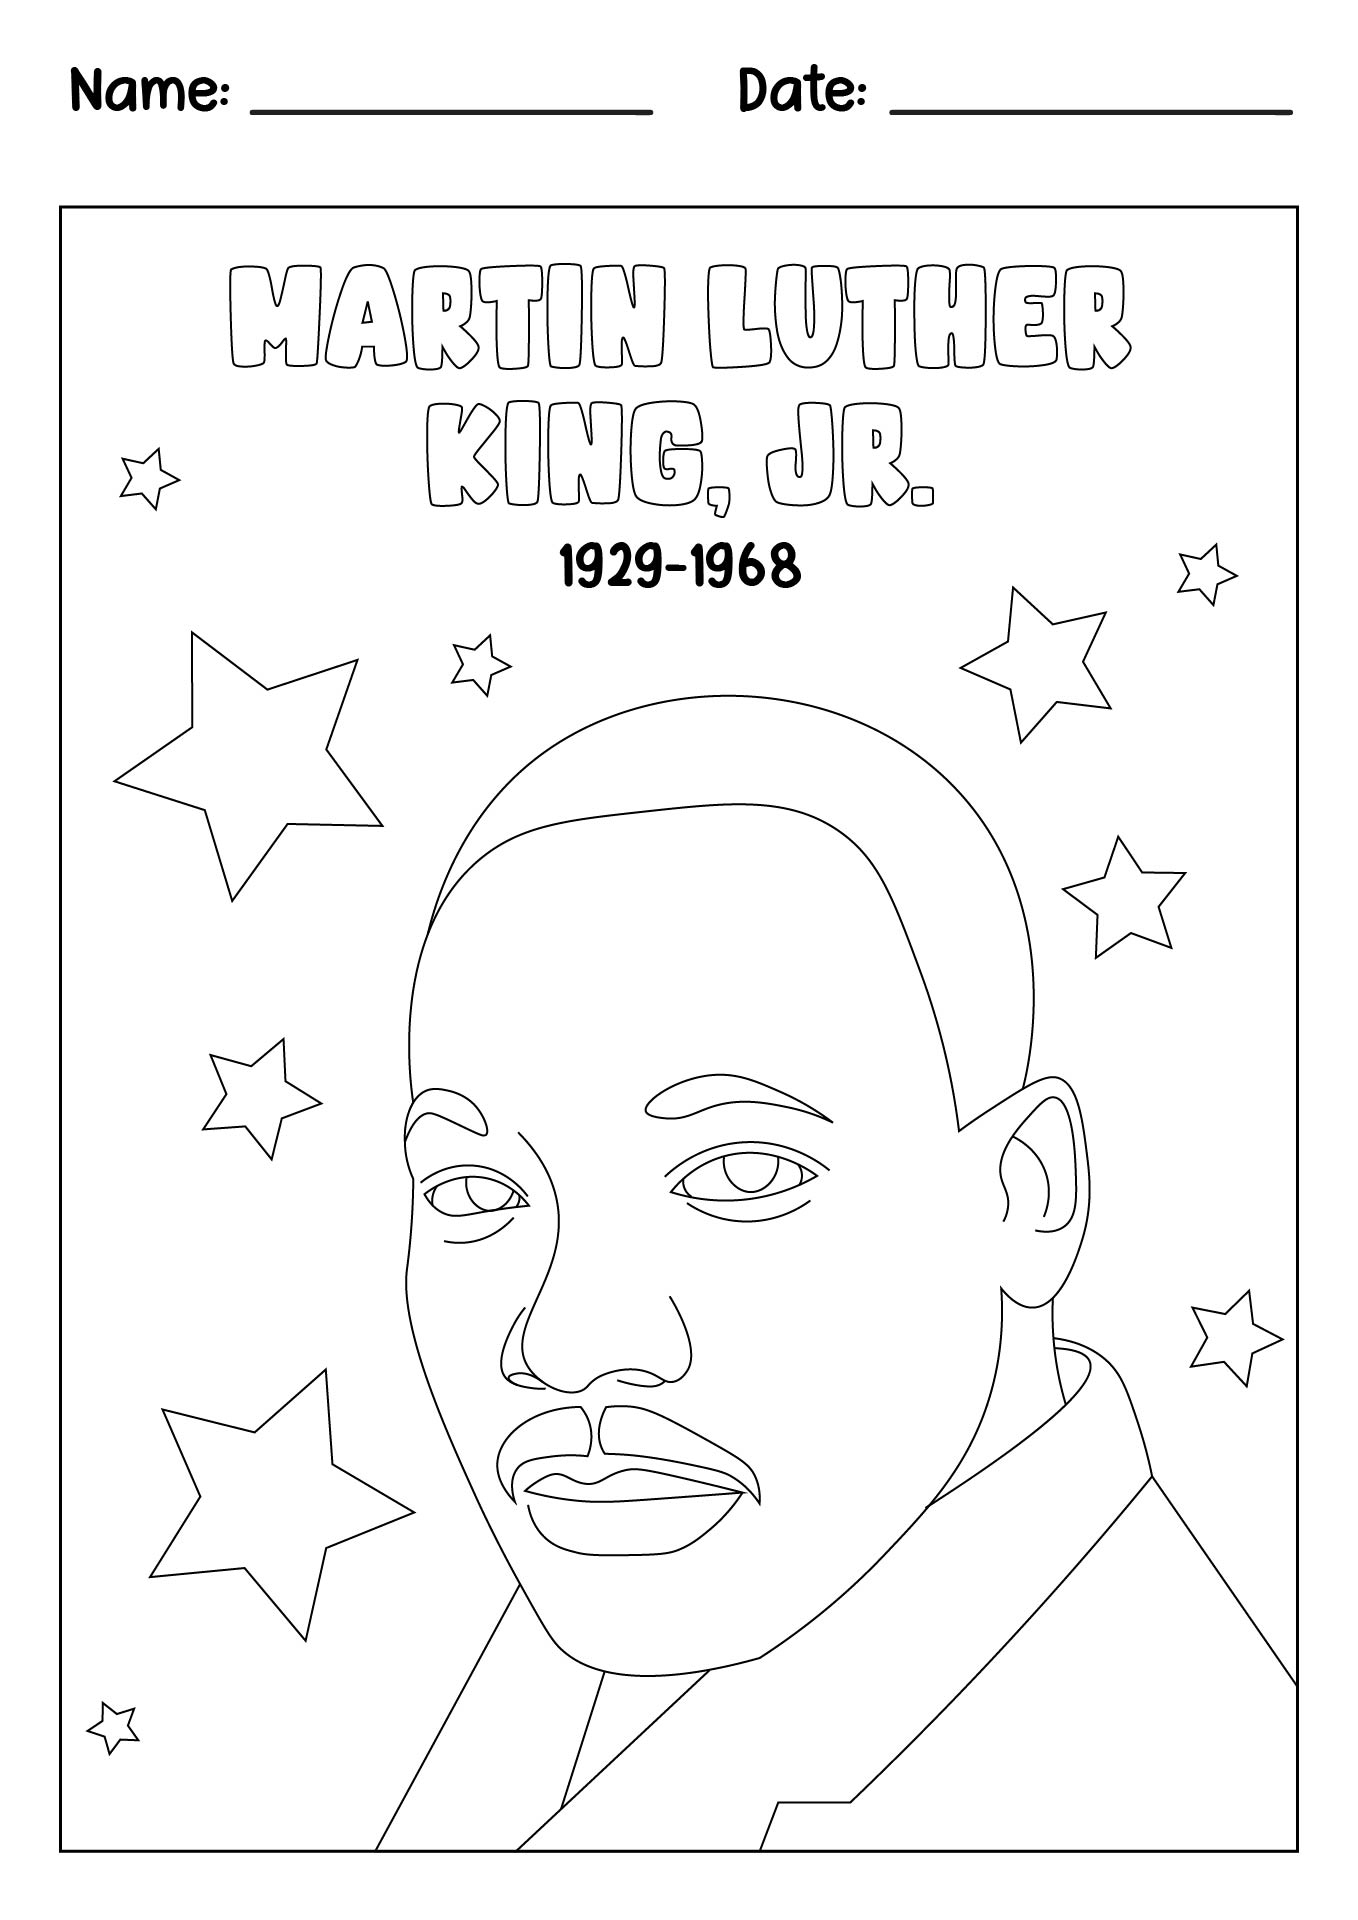 Martin Luther King Coloring Page for Kids